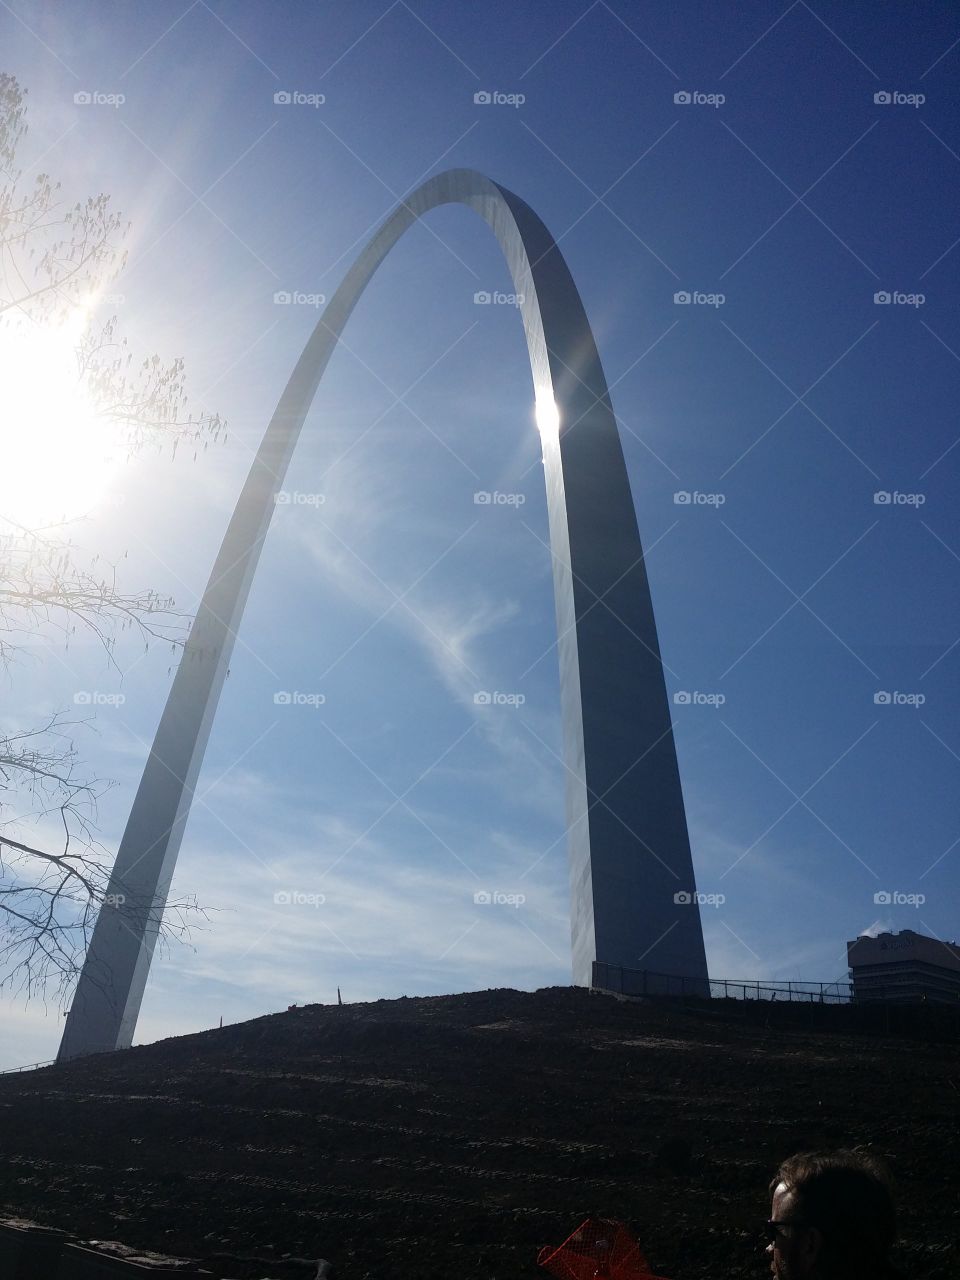 The Arch. First time to see the St. Louis Arch